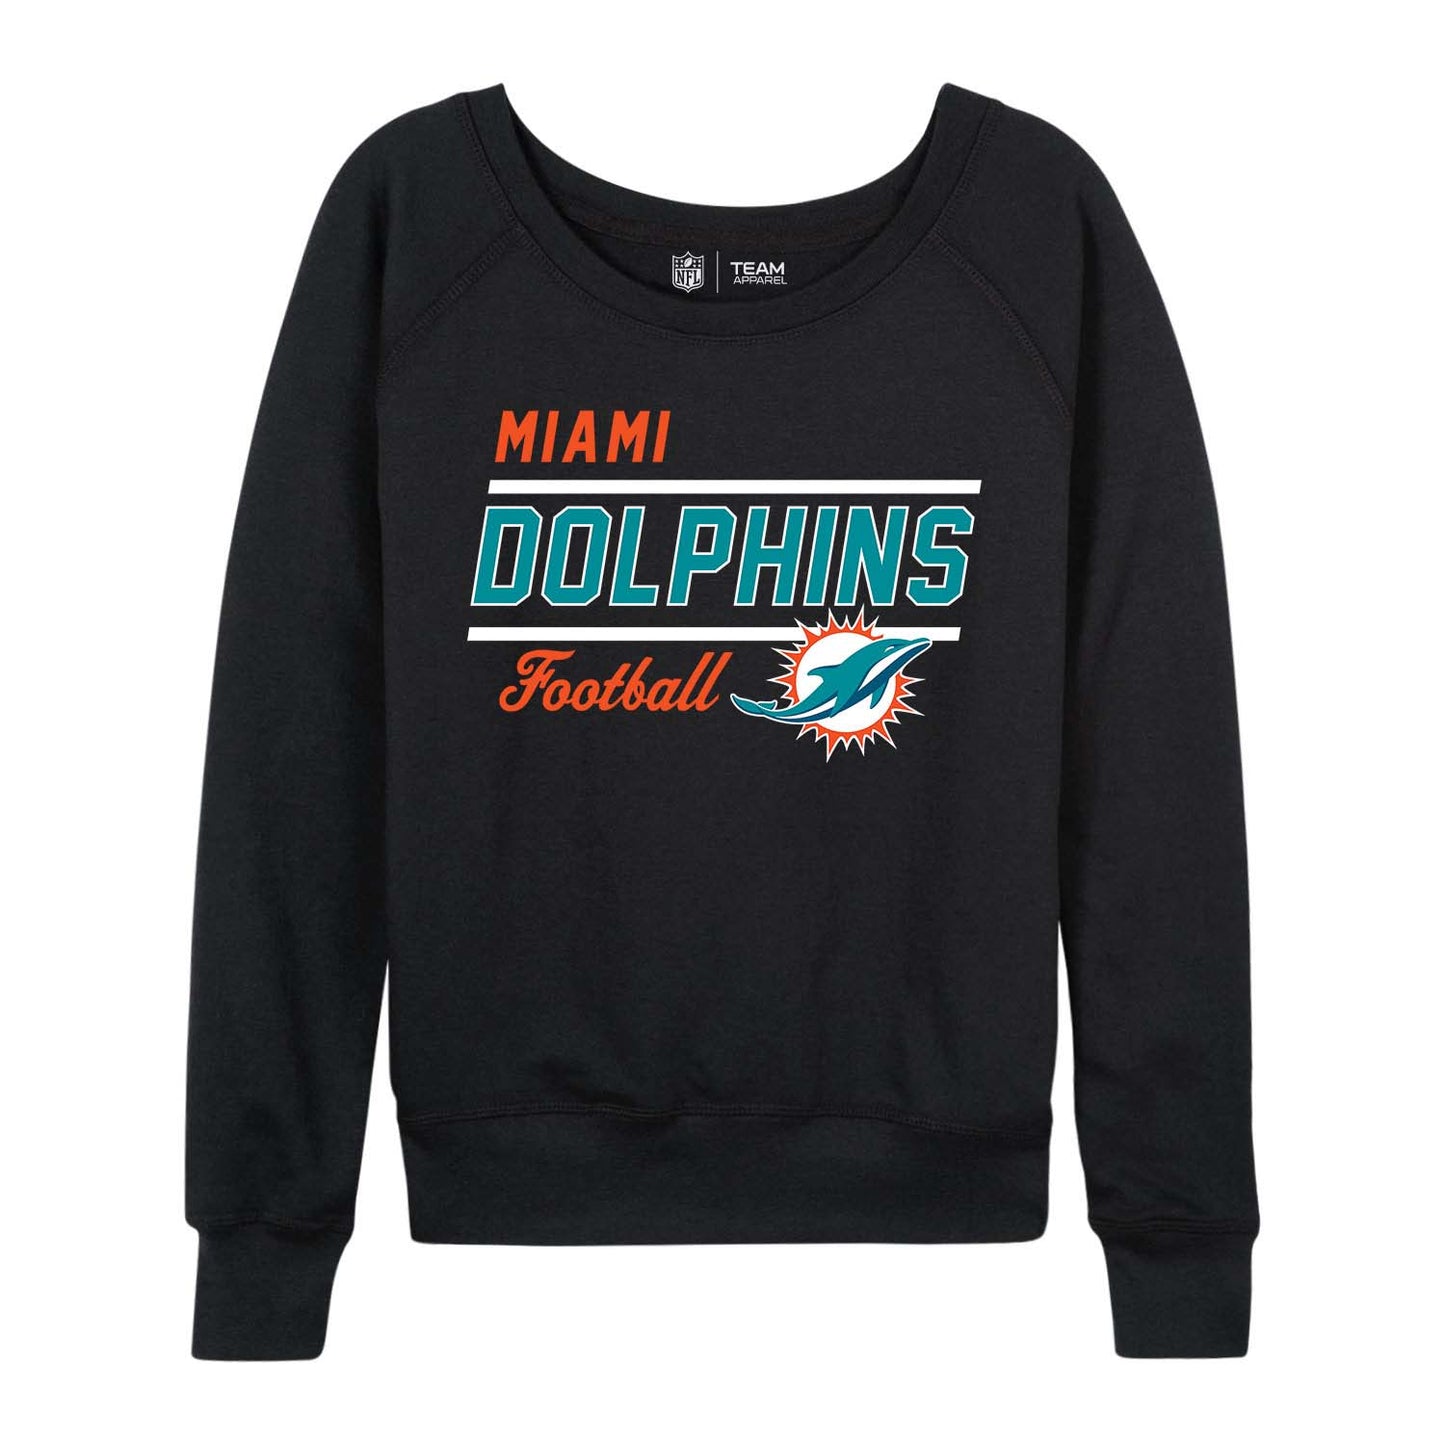 Miami Dolphins NFL Womens Crew Neck Light Weight - Black